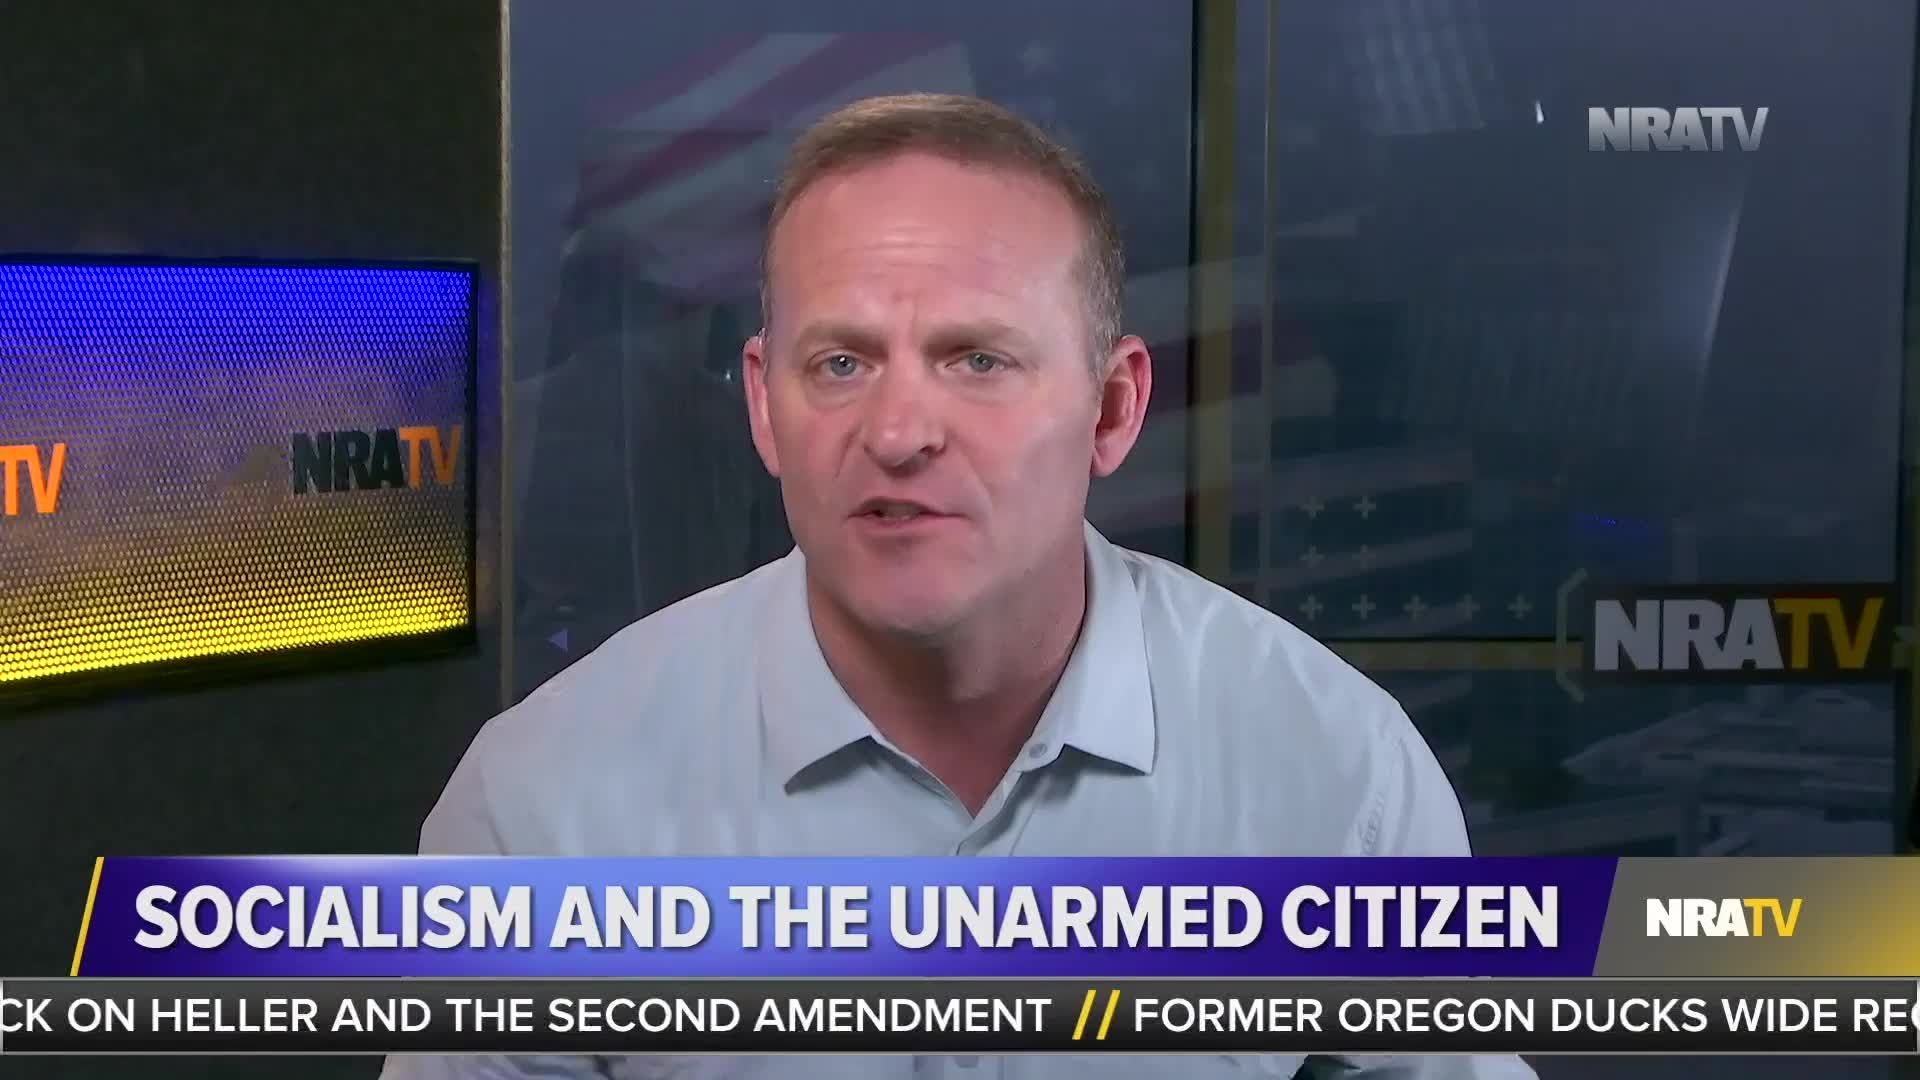 Calls for Socialism, Gun Confiscations Are No Coincidence | NRATV